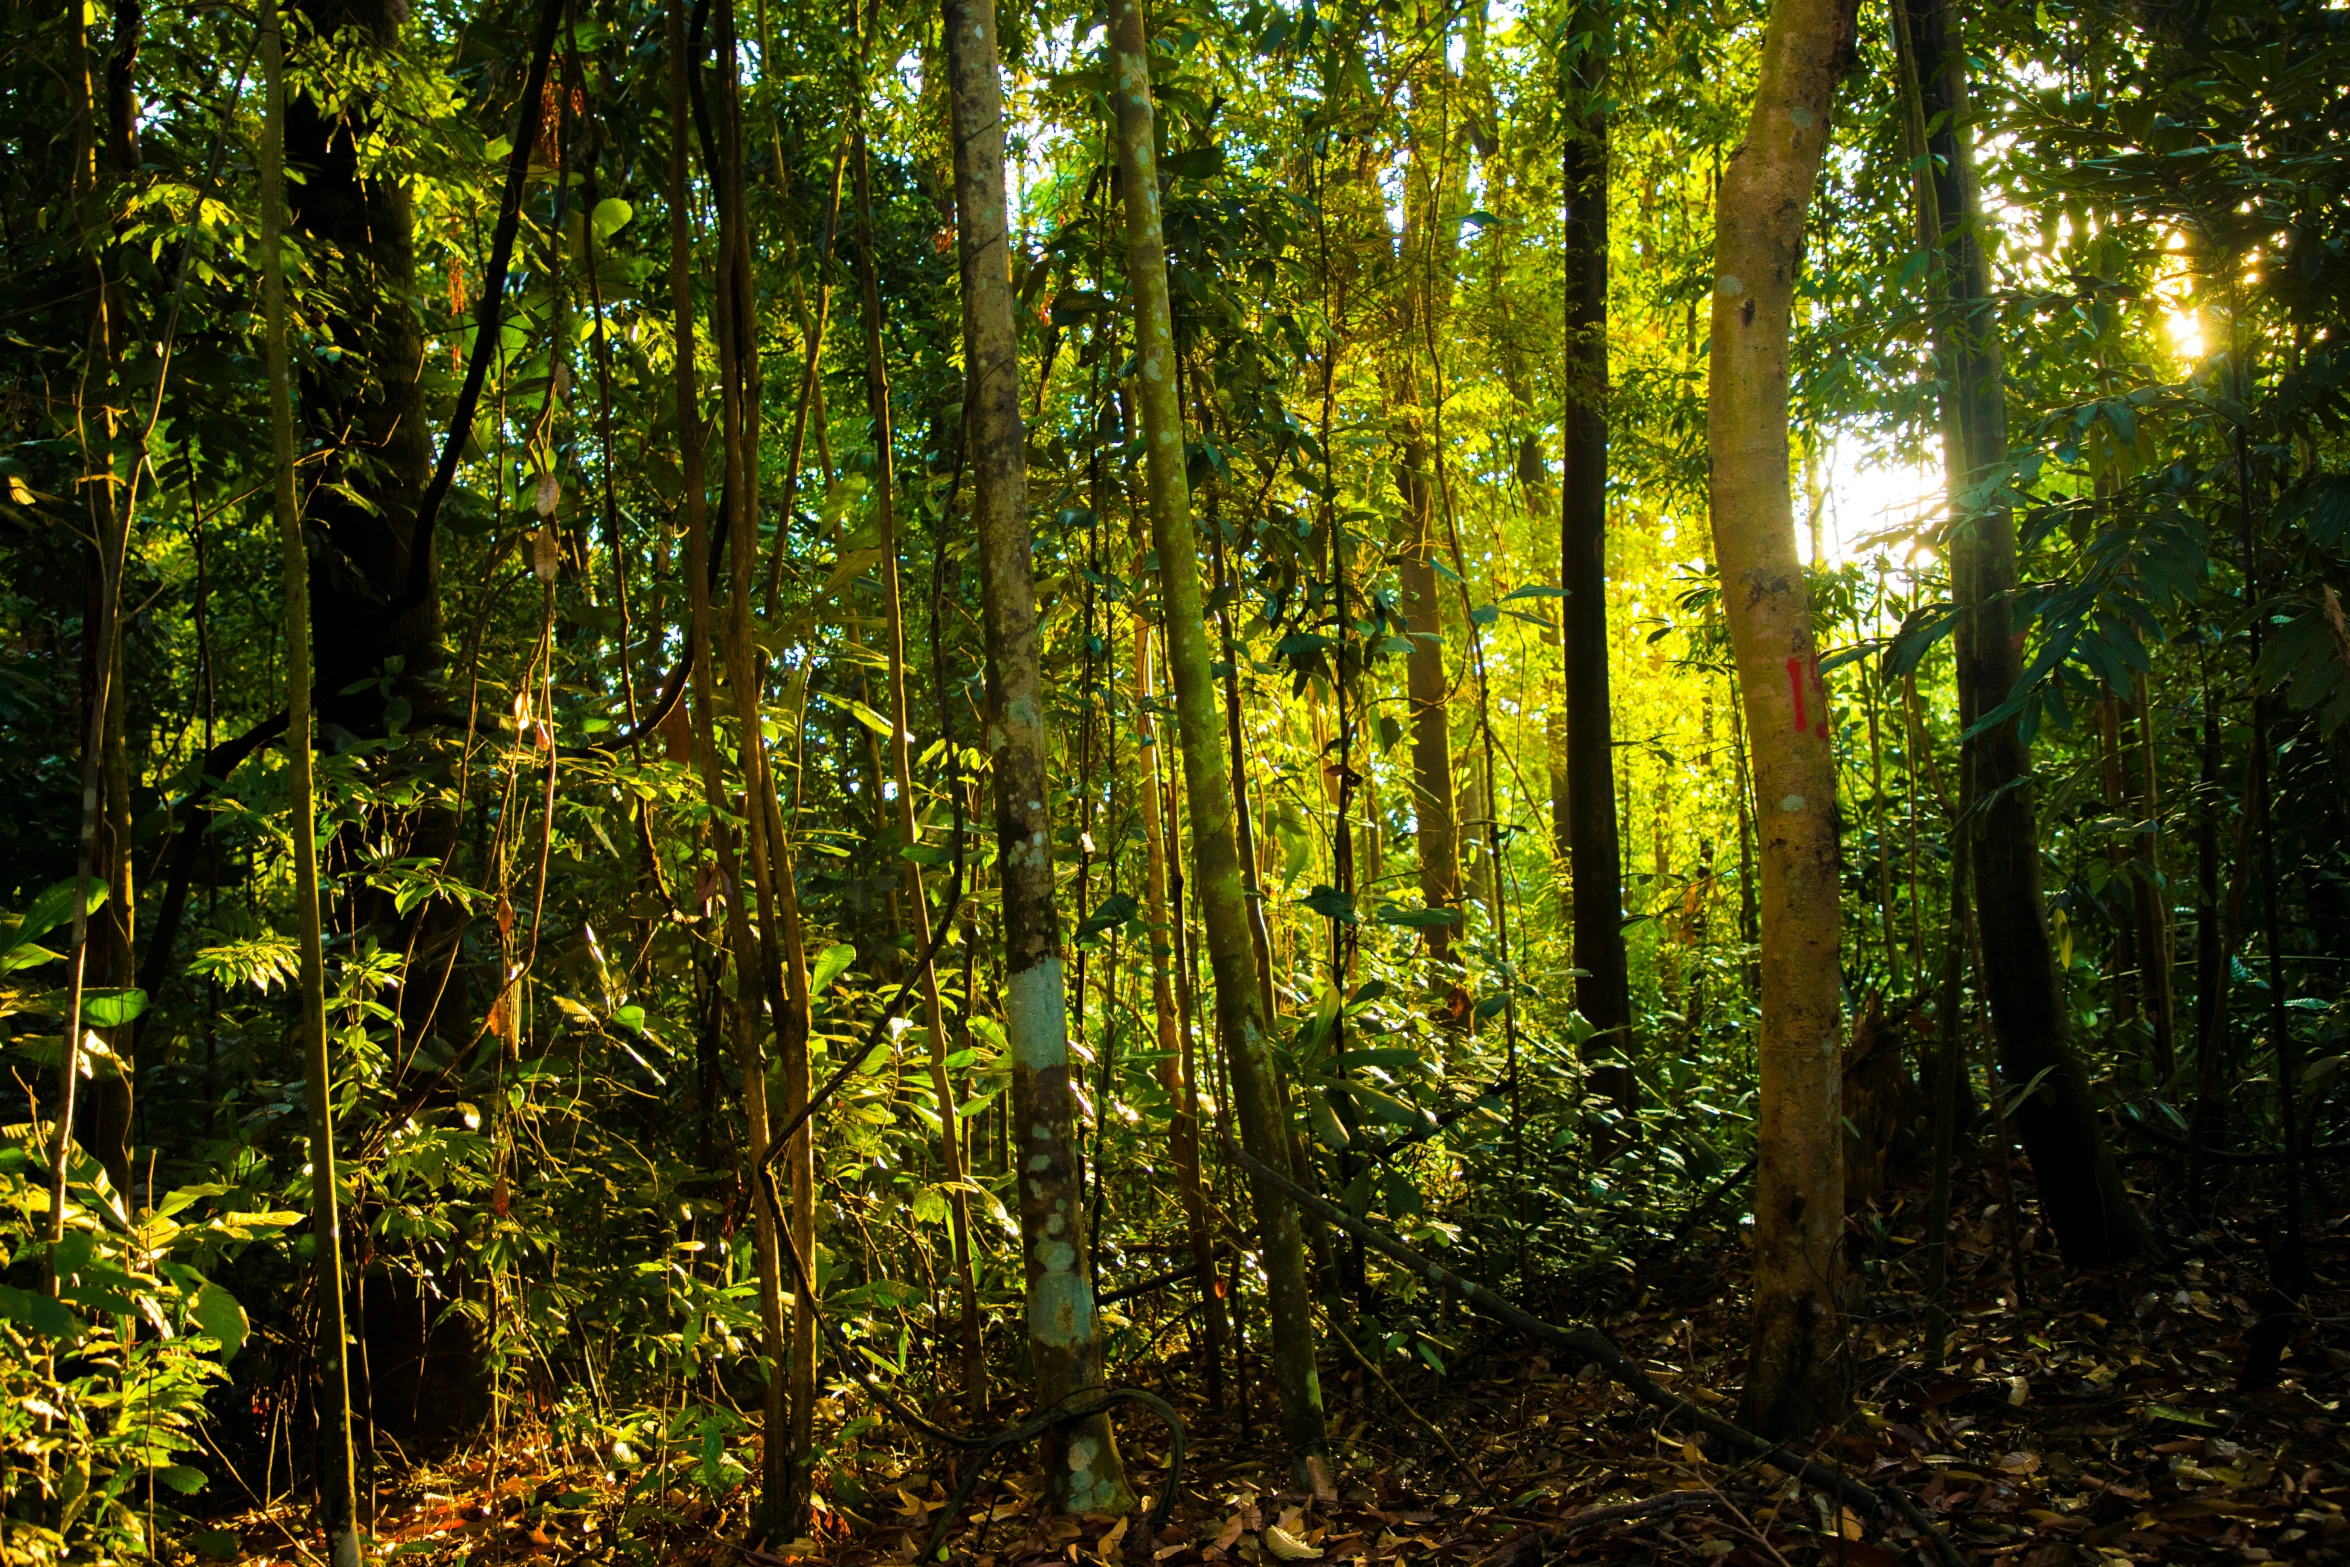 sun beams shine through the green leaves of the jungle